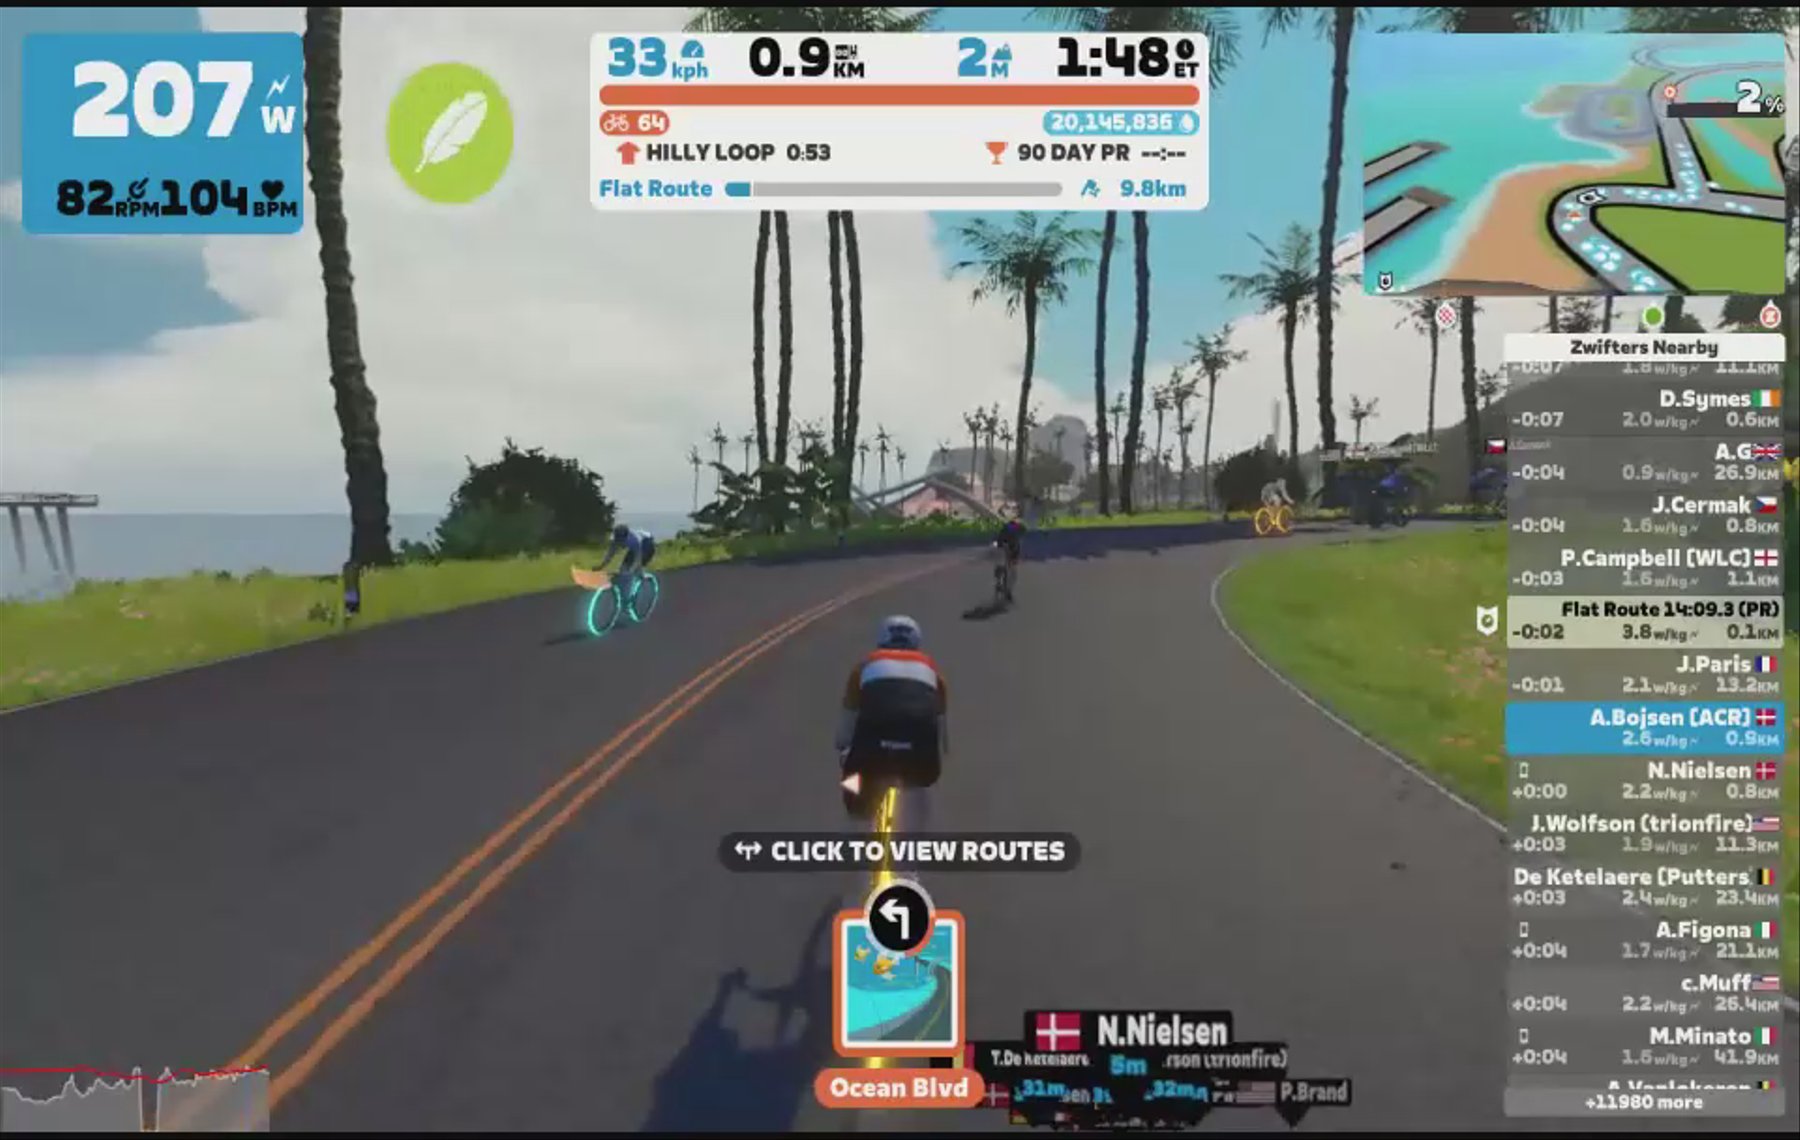 Zwift - New Workout on Flat Route in Watopia